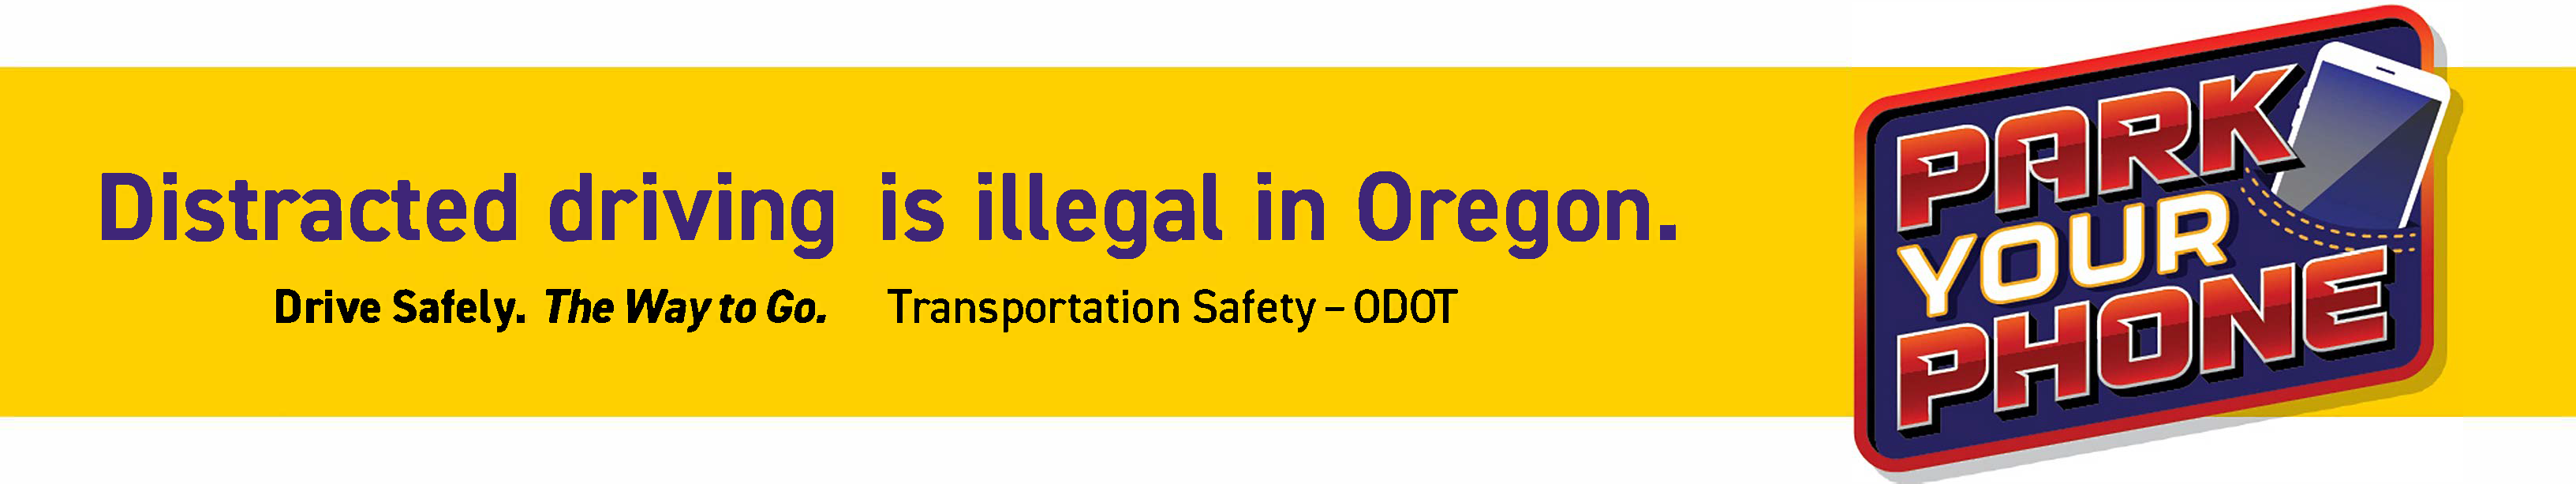 Distracted driving is illegal in Oregon.  Drive Safely. The Way to Go.